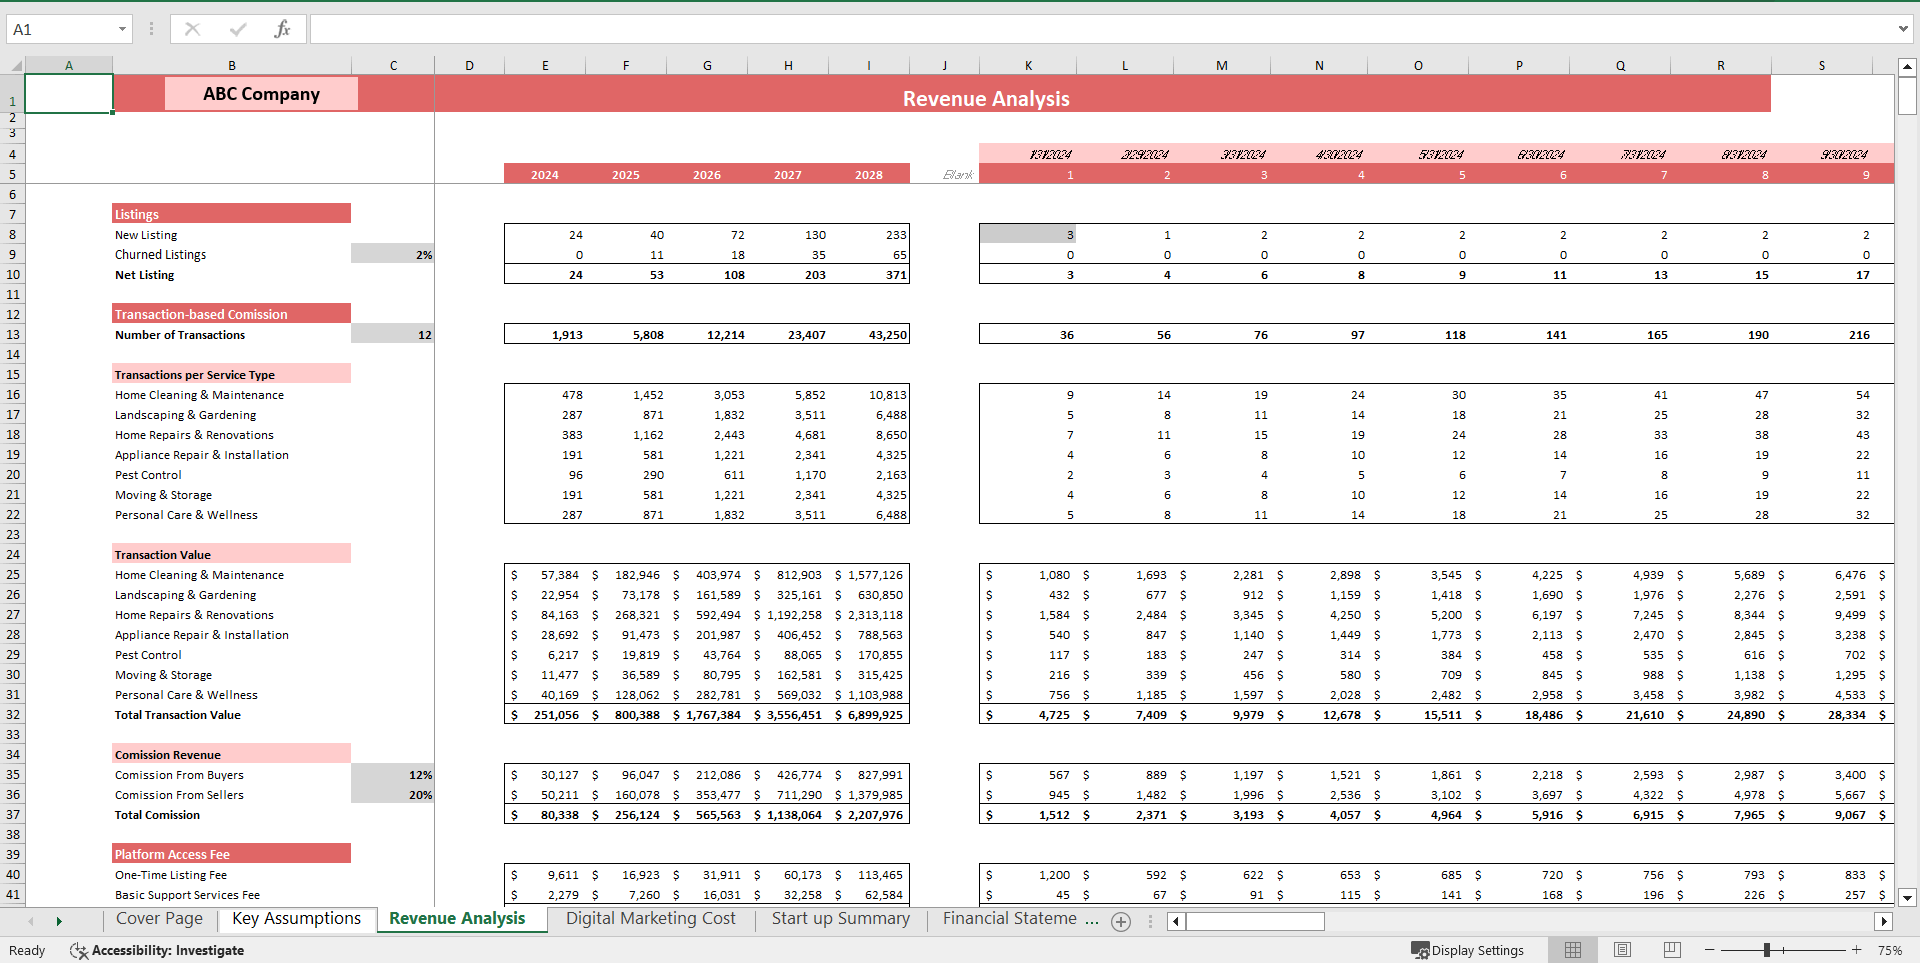 Household Service Marketplace DCF Valuation Excel Model (Excel template (XLSX)) Preview Image